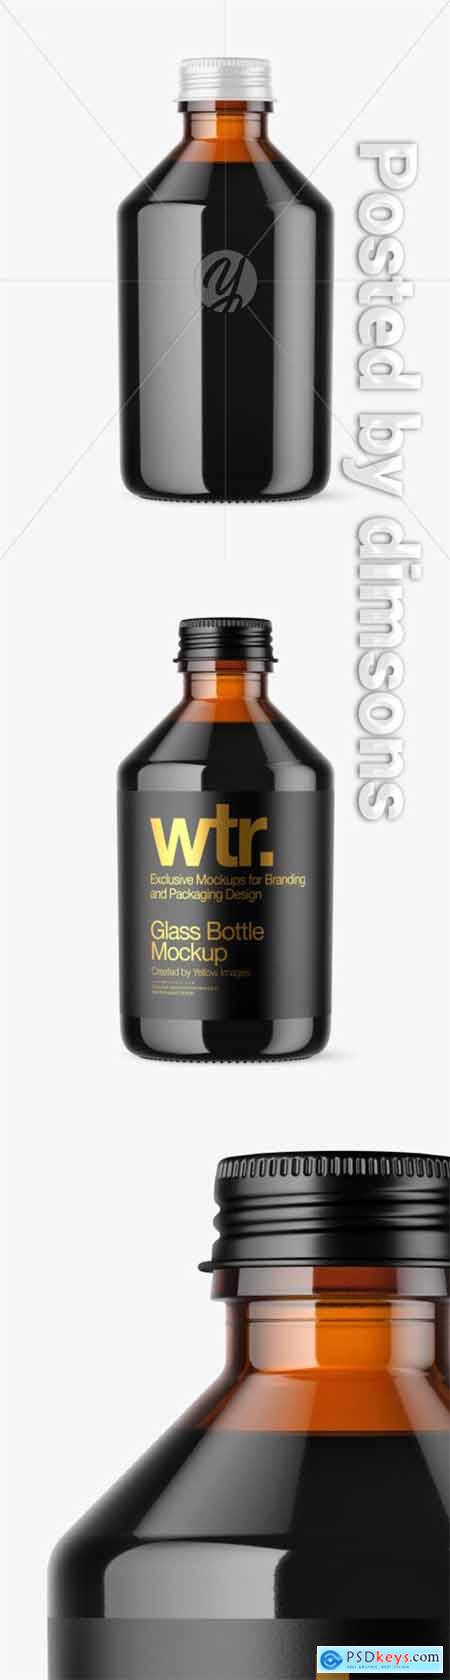 Download Cold Brew Coffee Bottle Mockup 63033 Free Download Photoshop Vector Stock Image Via Torrent Zippyshare From Psdkeys Com